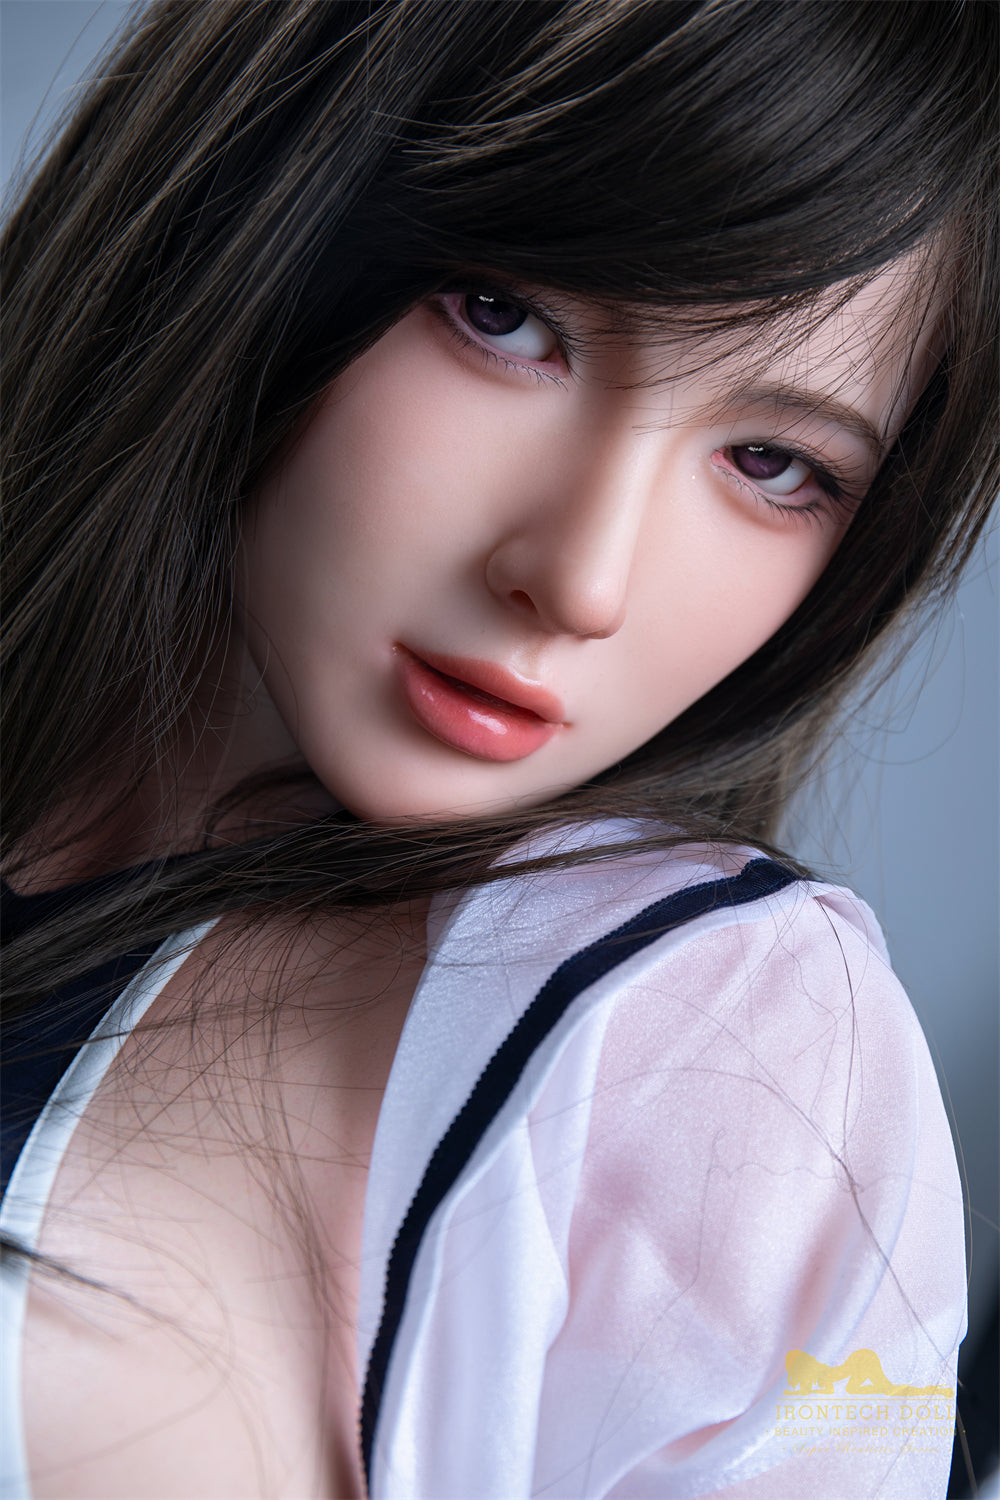 Irontech Doll 164 cm G Silicone - Miya | Buy Sex Dolls at DOLLS ACTUALLY